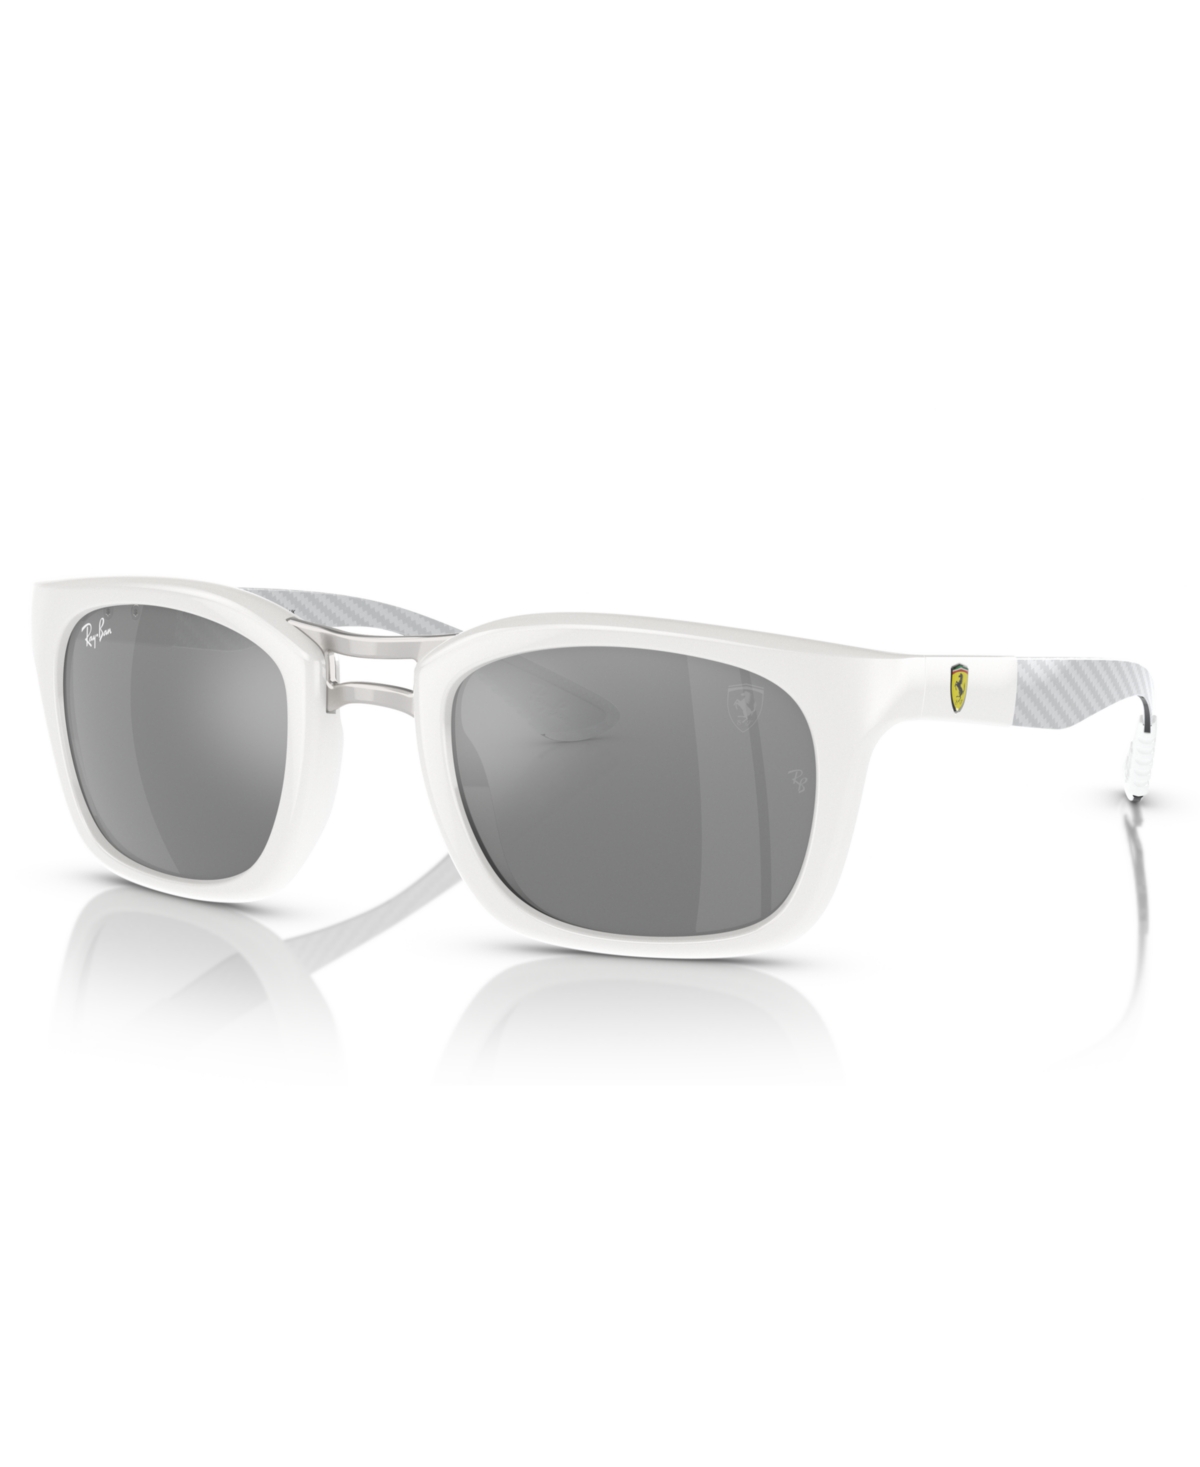 Ray Ban Unisex Sunglasses, Rb8362m In White